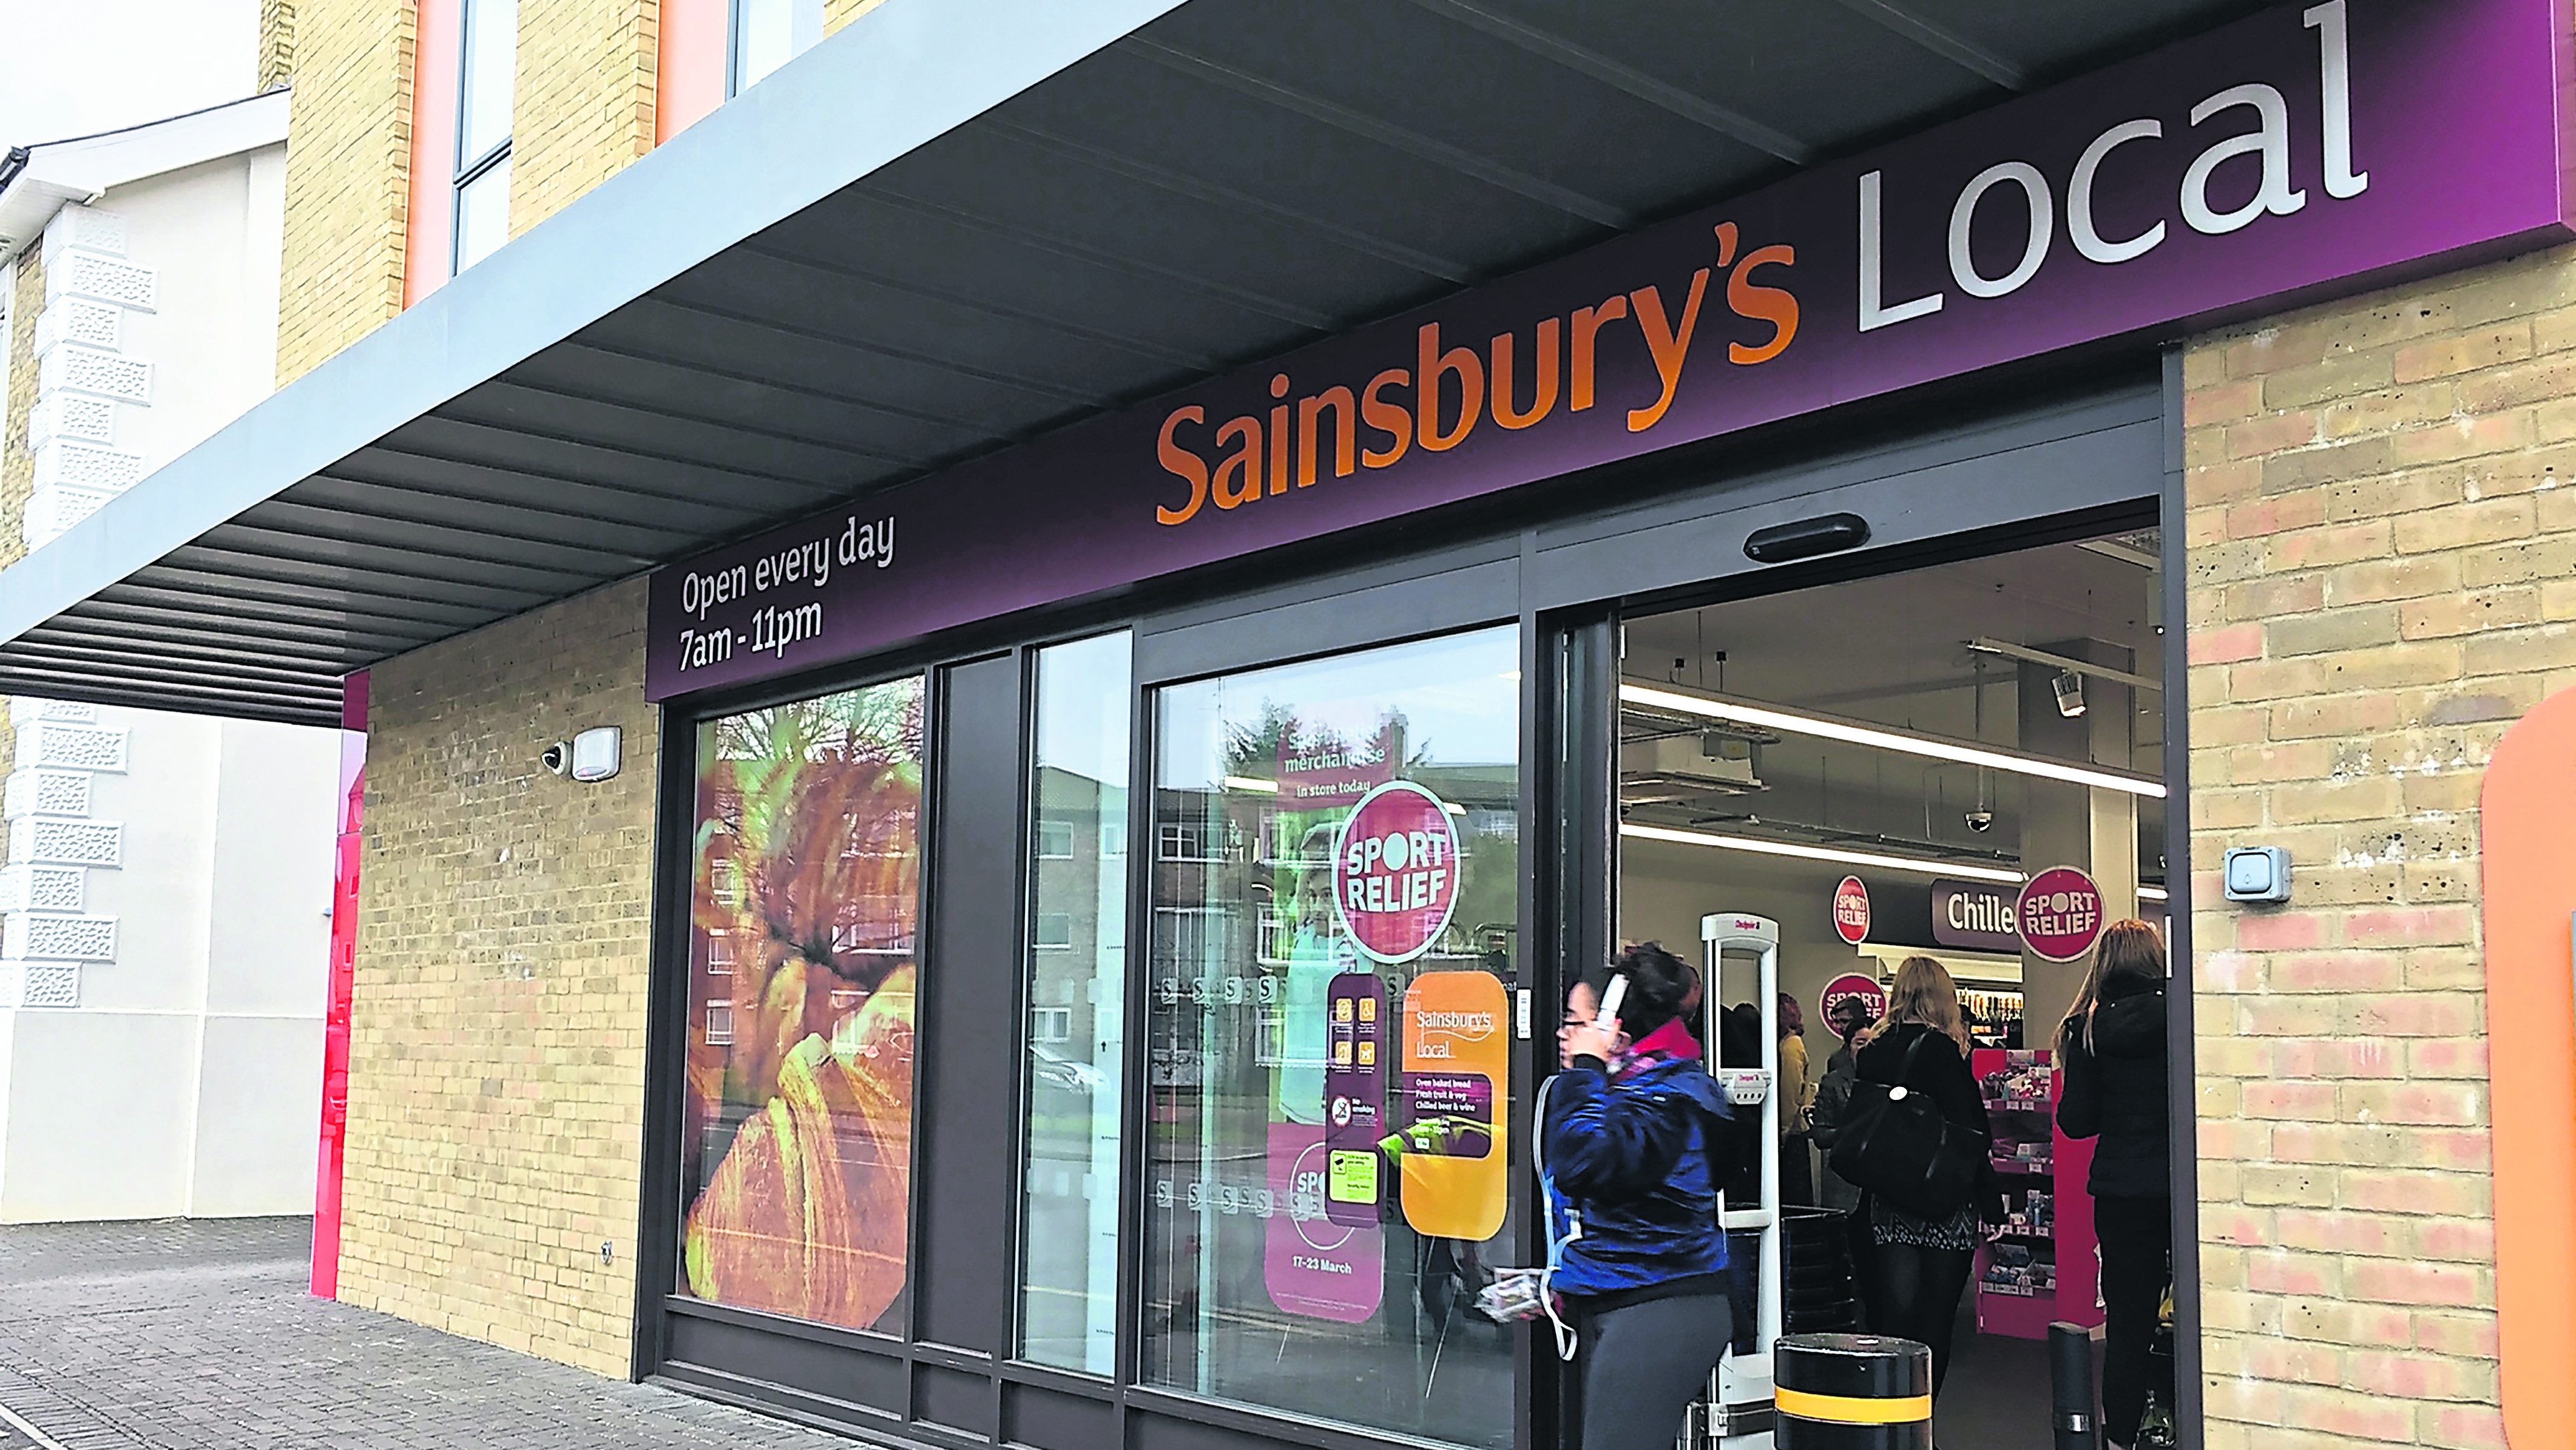 New Sainsbury’s is harming our trade, say shopkeepers